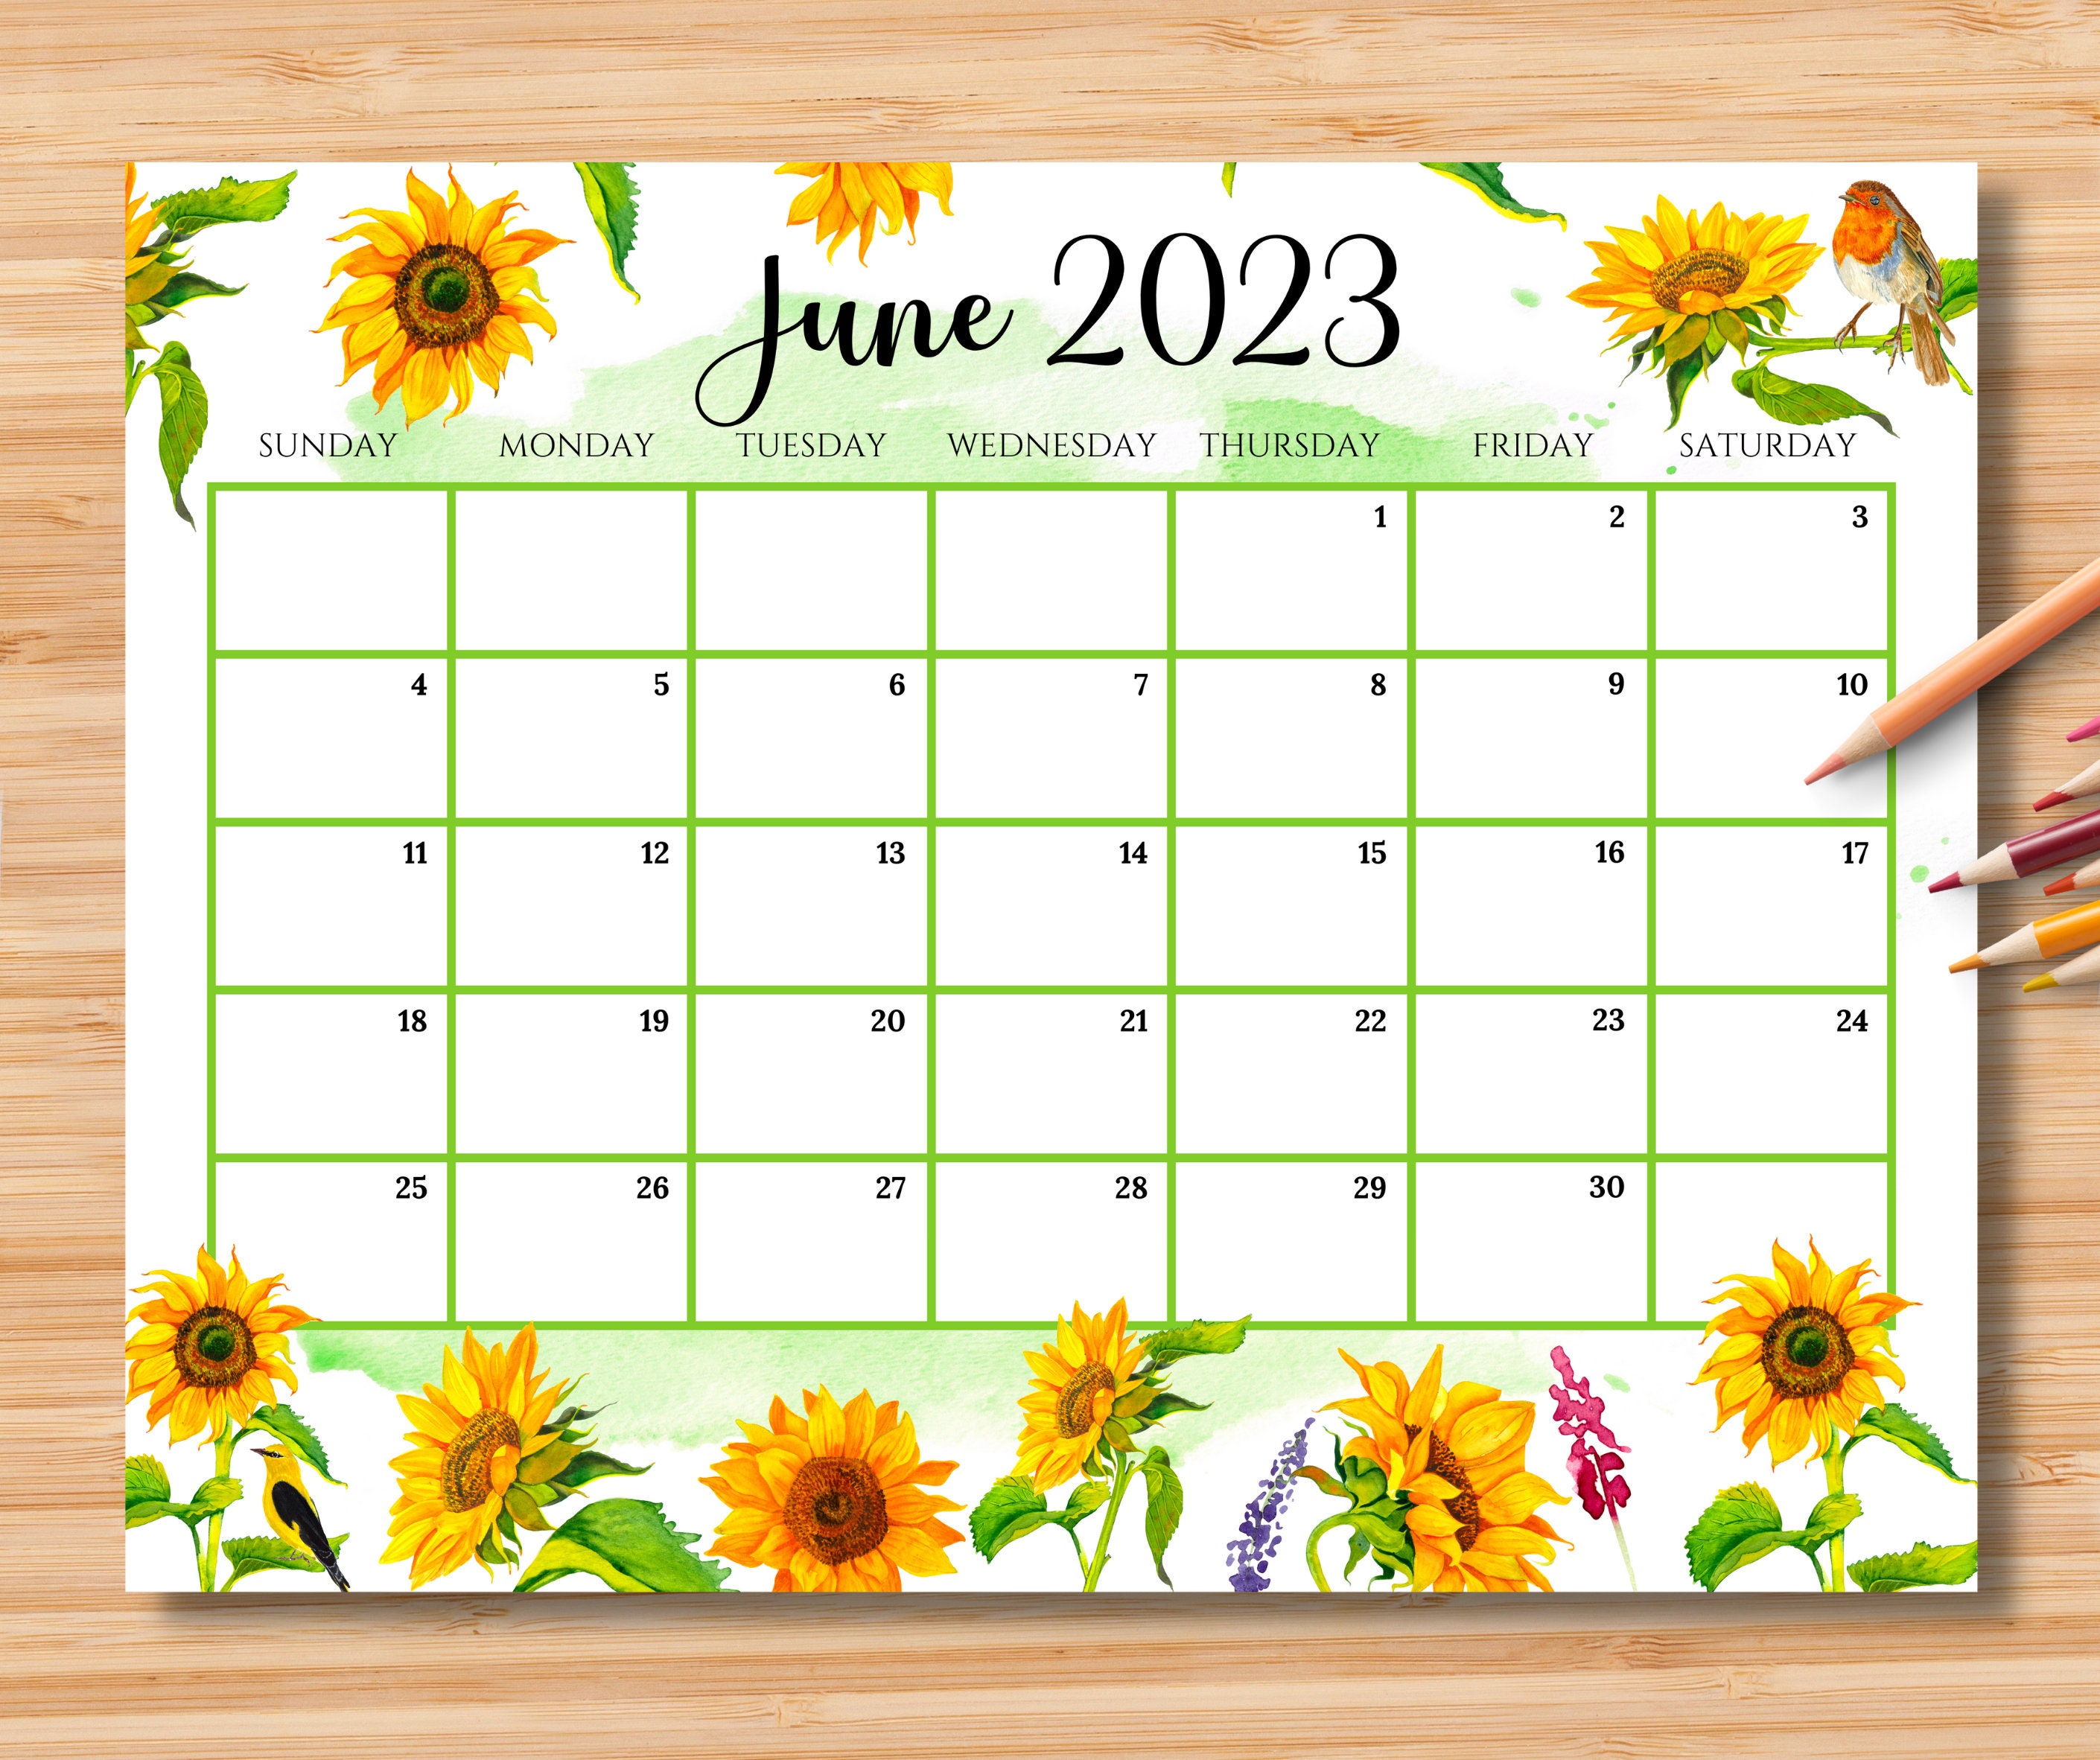 EDITABLE June 2023 Calendar Gorgeous Summer With Beautiful Etsy